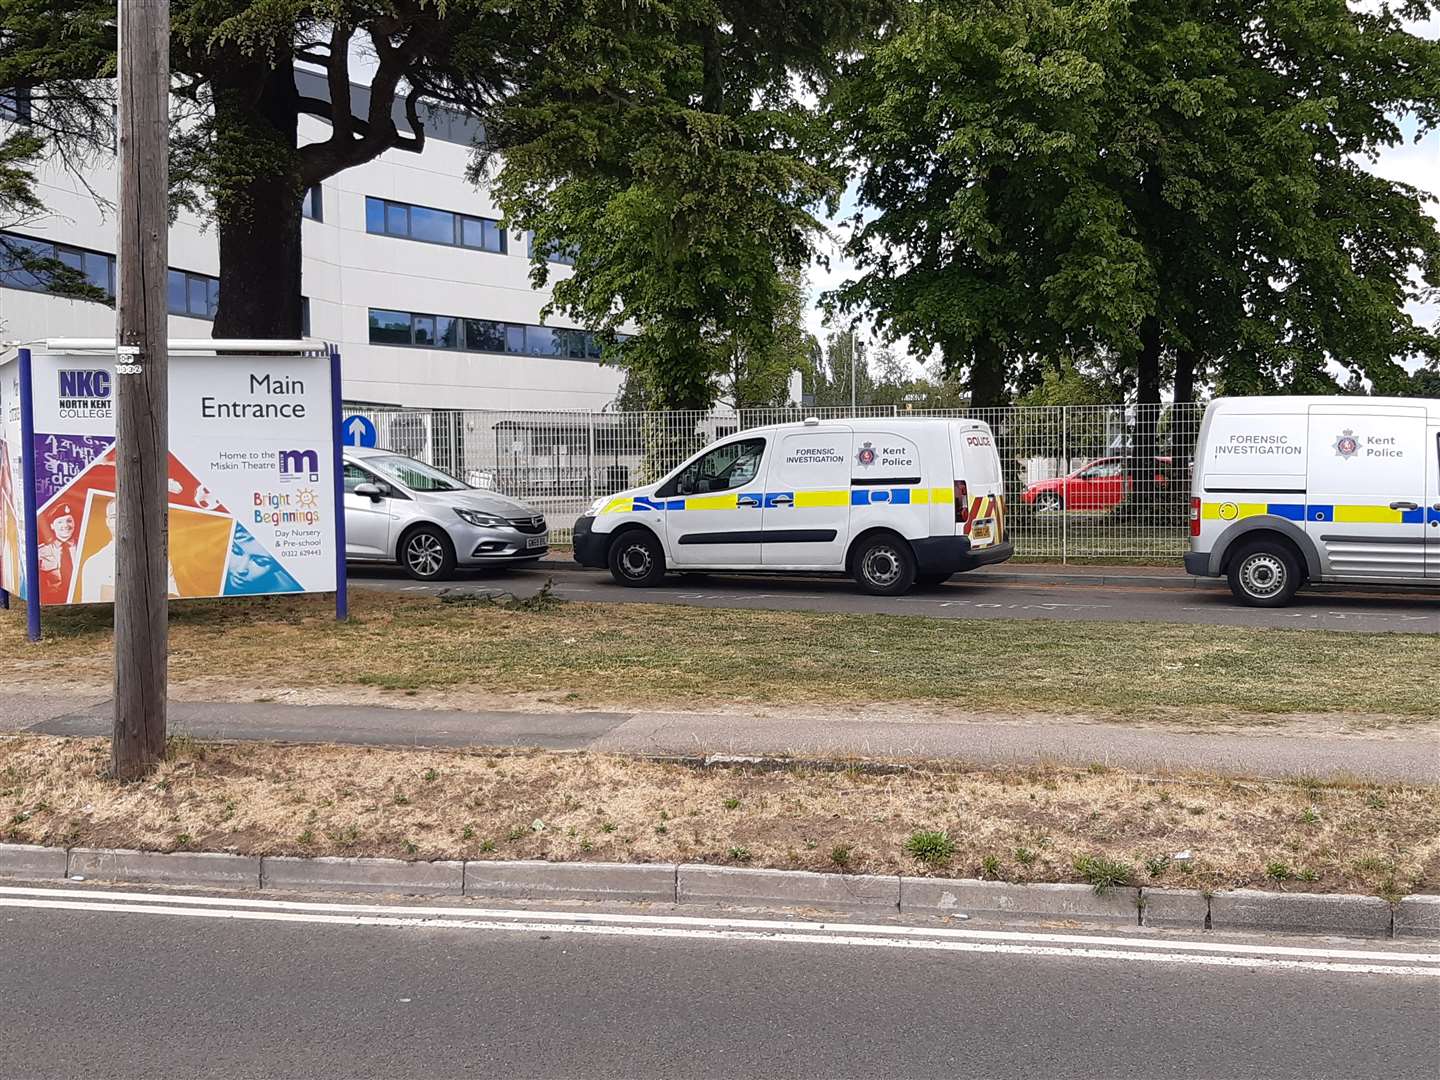 The incident happened at a house in Oakfield Lane in Dartford near North Kent College